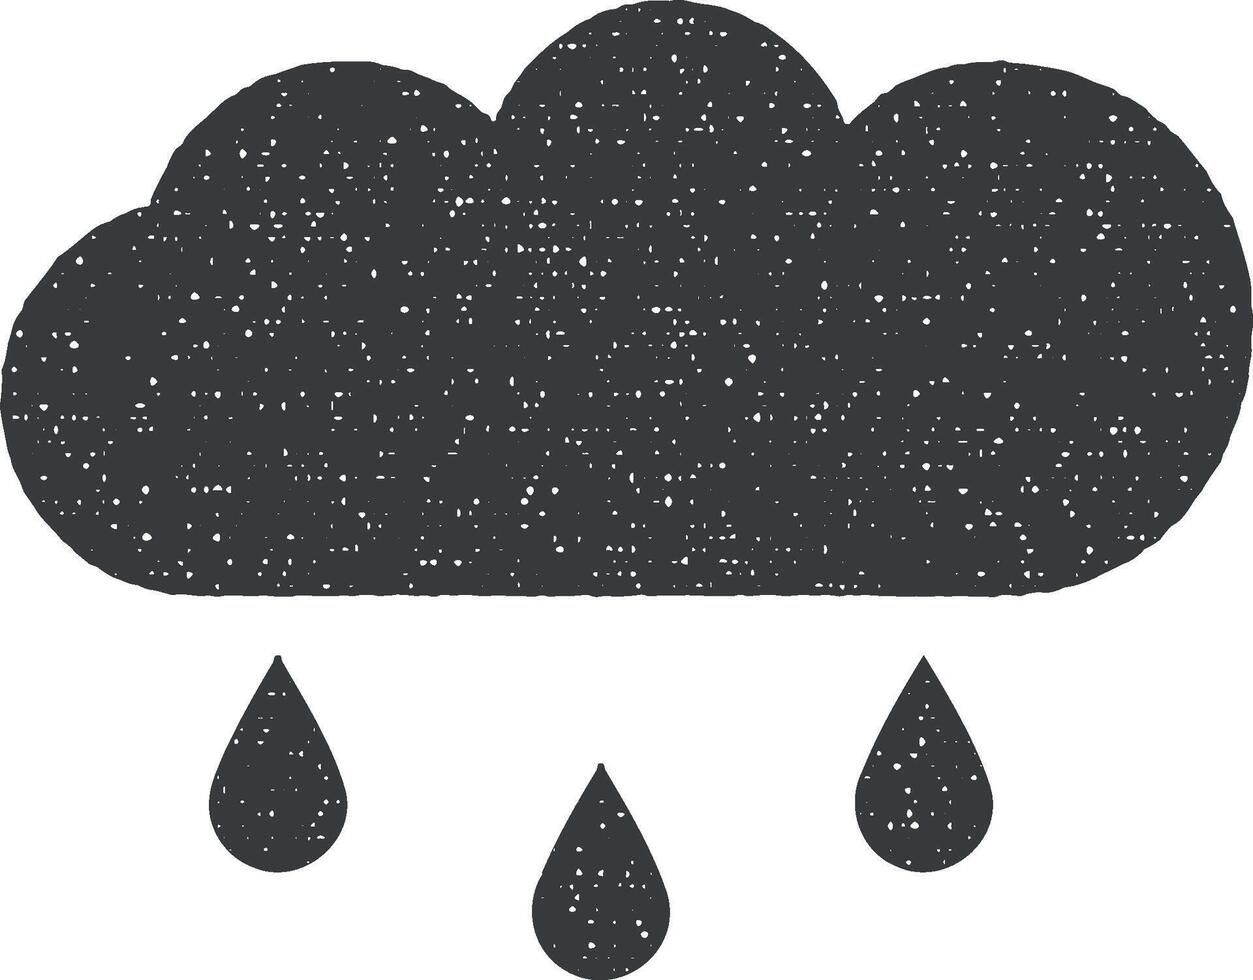 Cloud, forecast, rain vector icon illustration with stamp effect